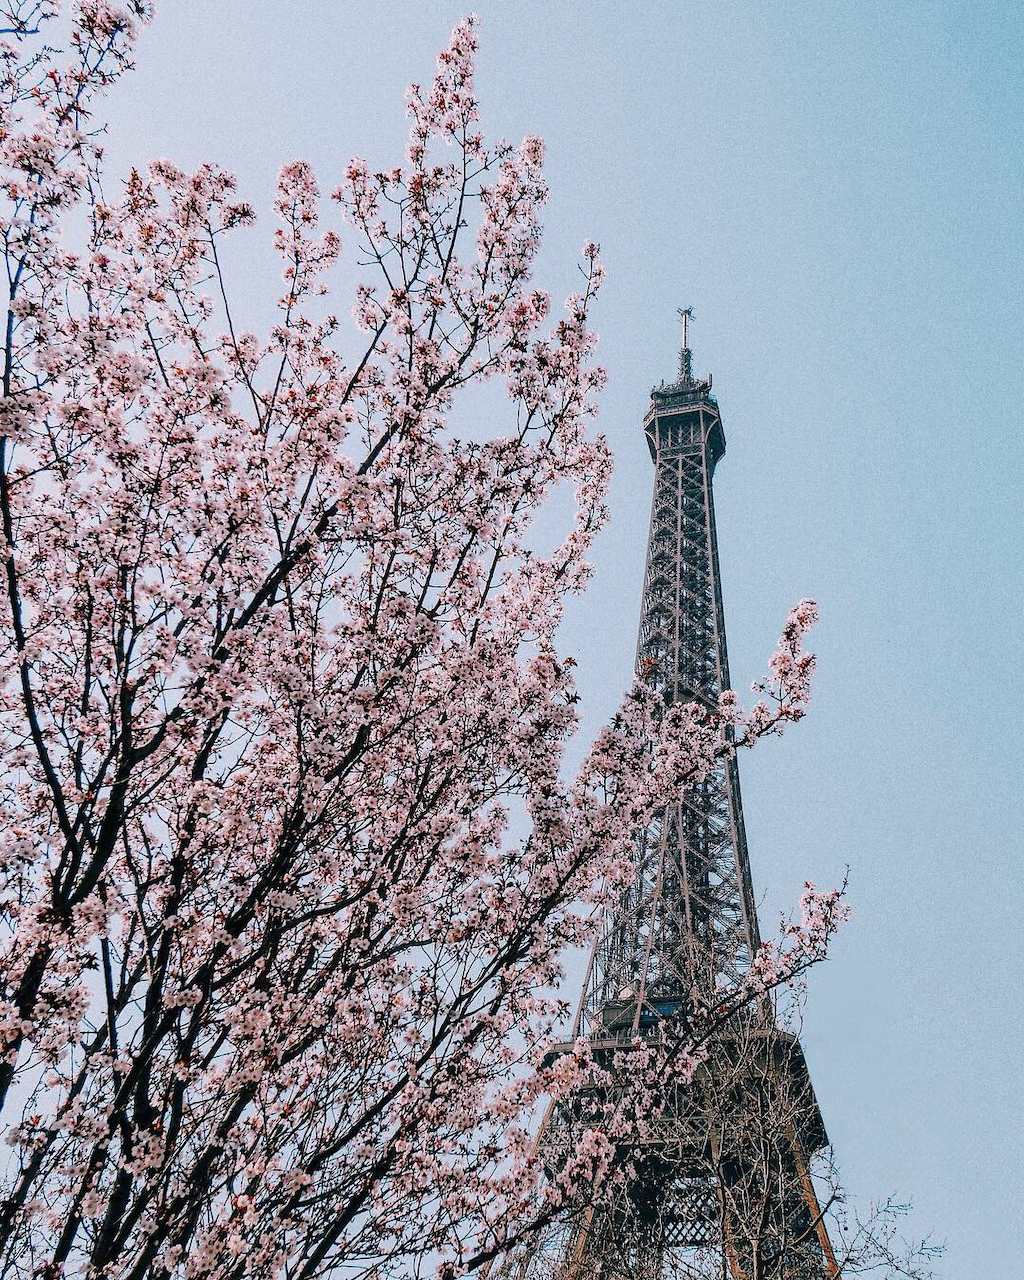 Spring in full bloom at the Eiffel Tower - Paris - France